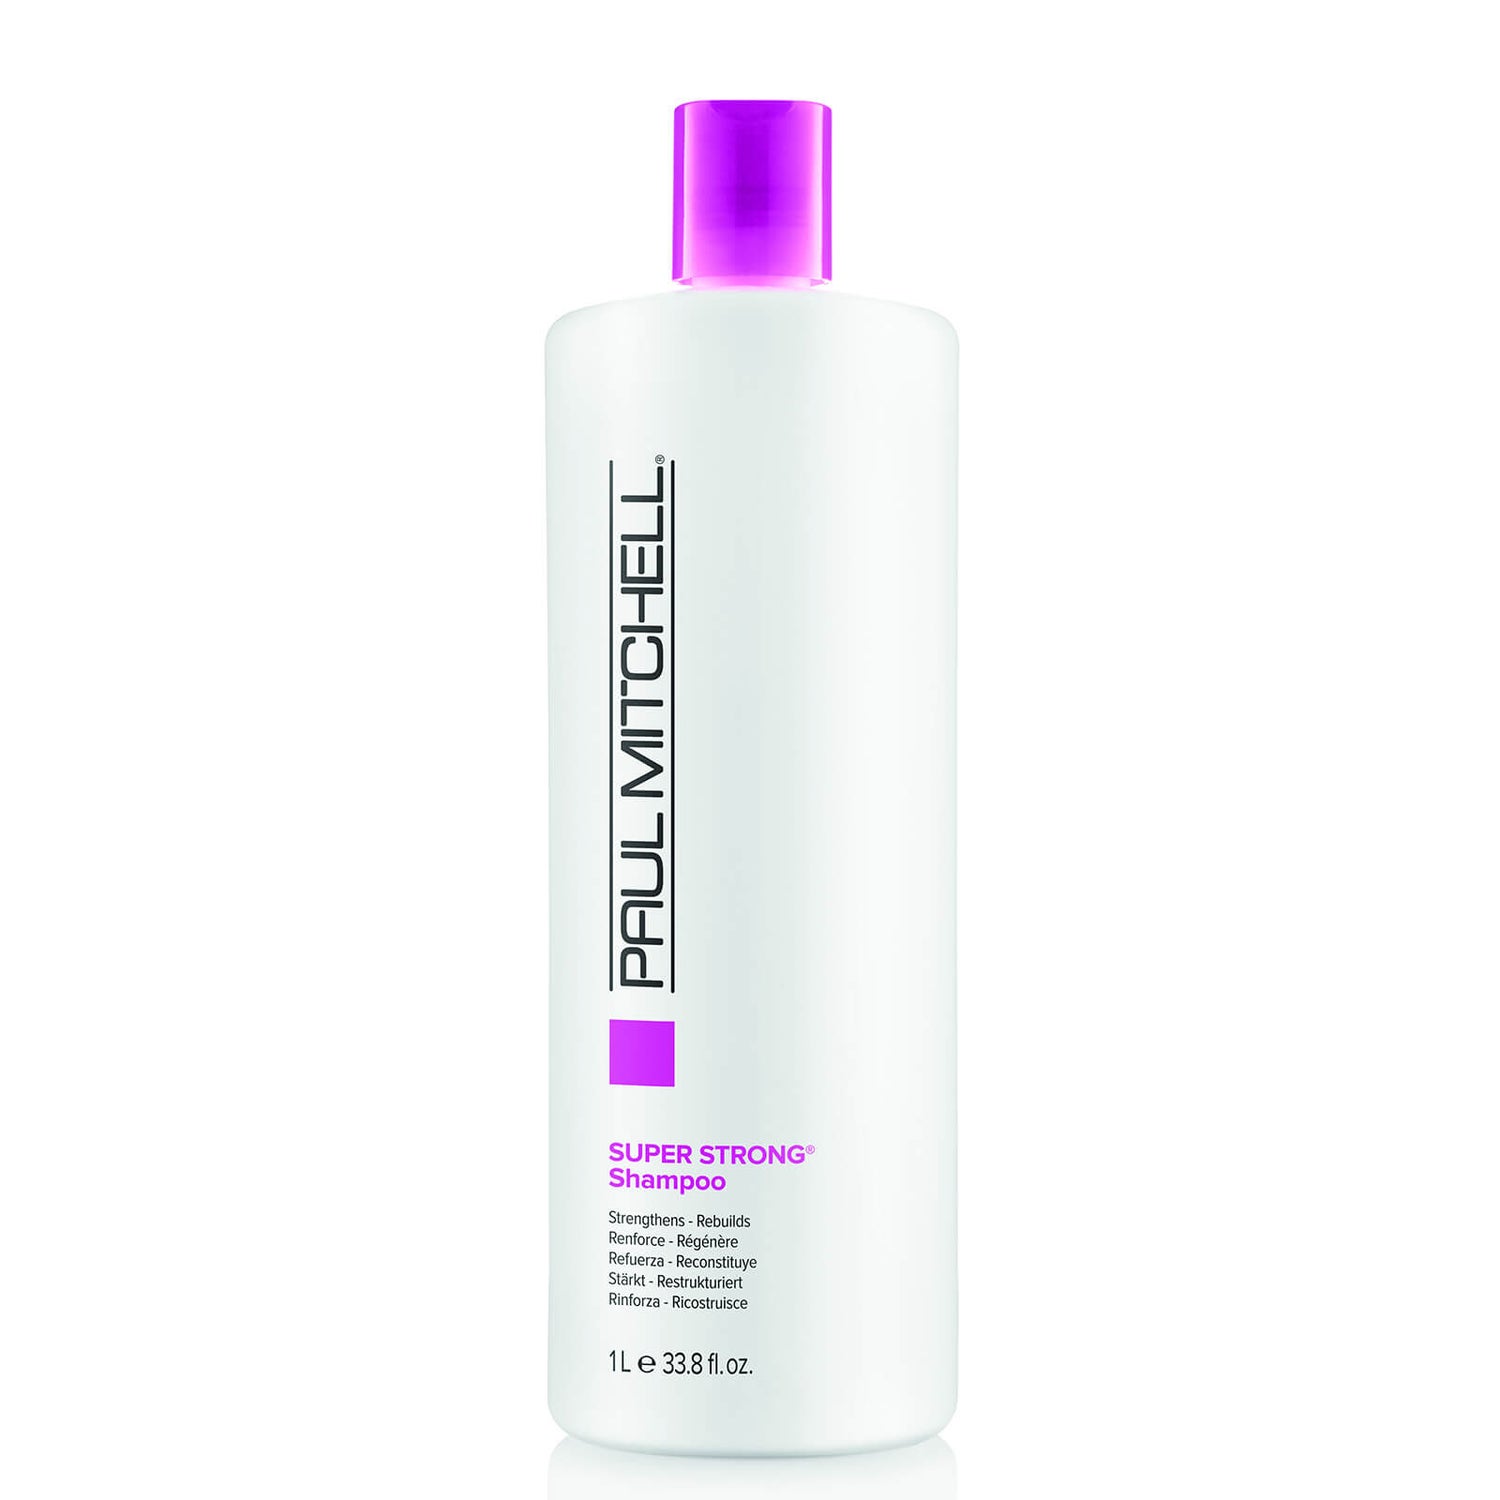 Paul Mitchell Super Strong Daily Shampoo (1000ml) - (Worth £41.00)